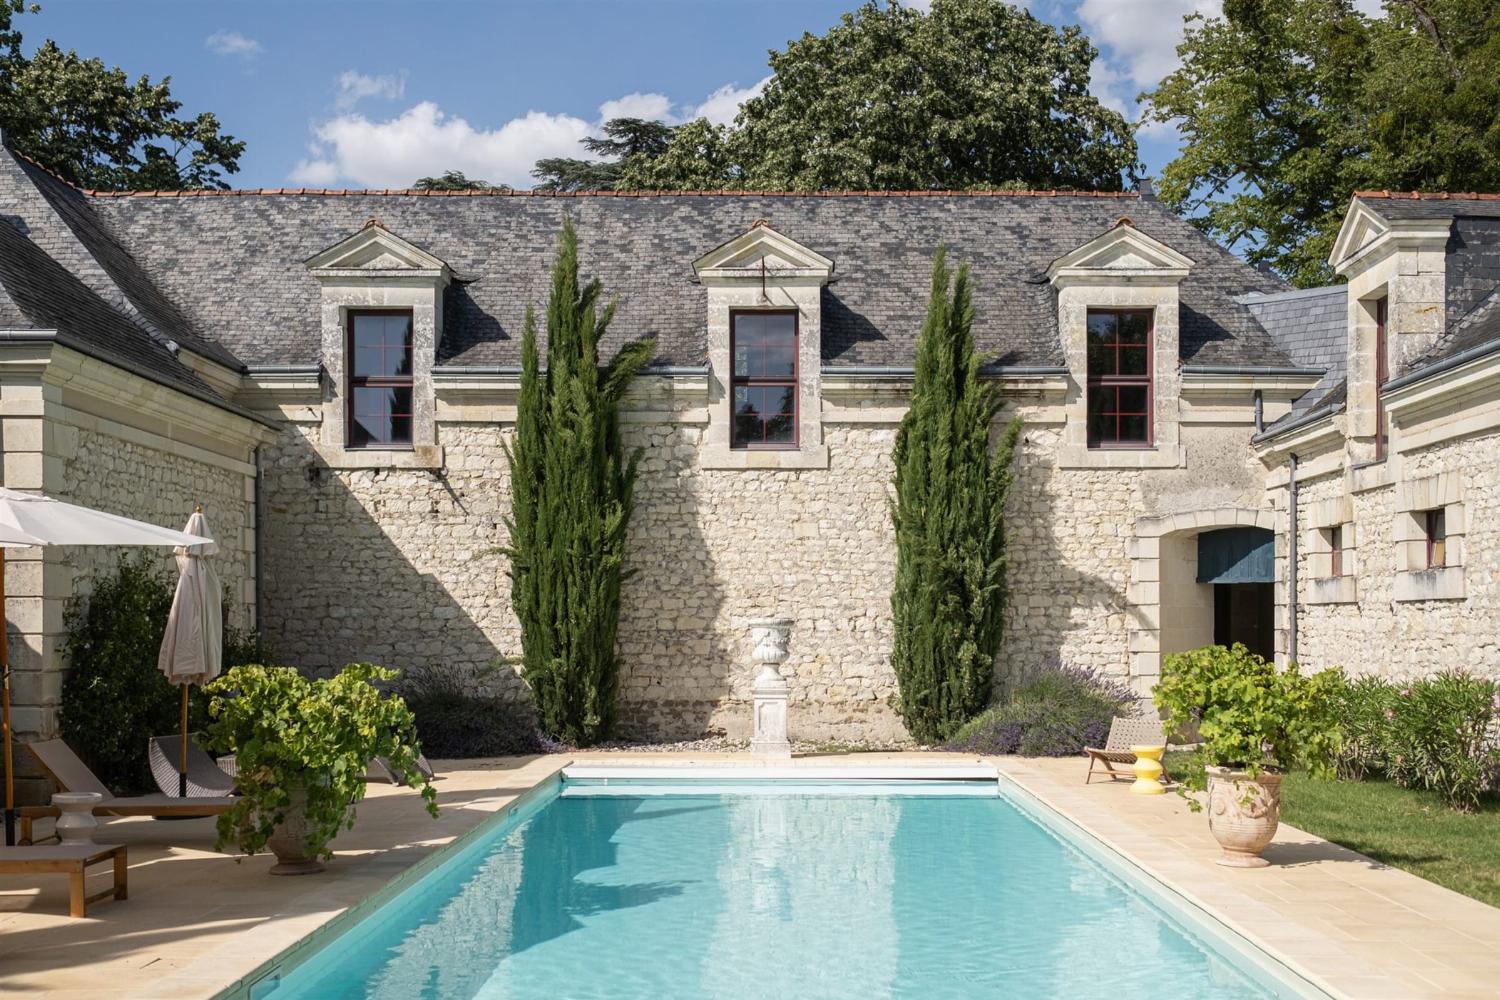 Private pool | Holiday château in Indre-et-Loire